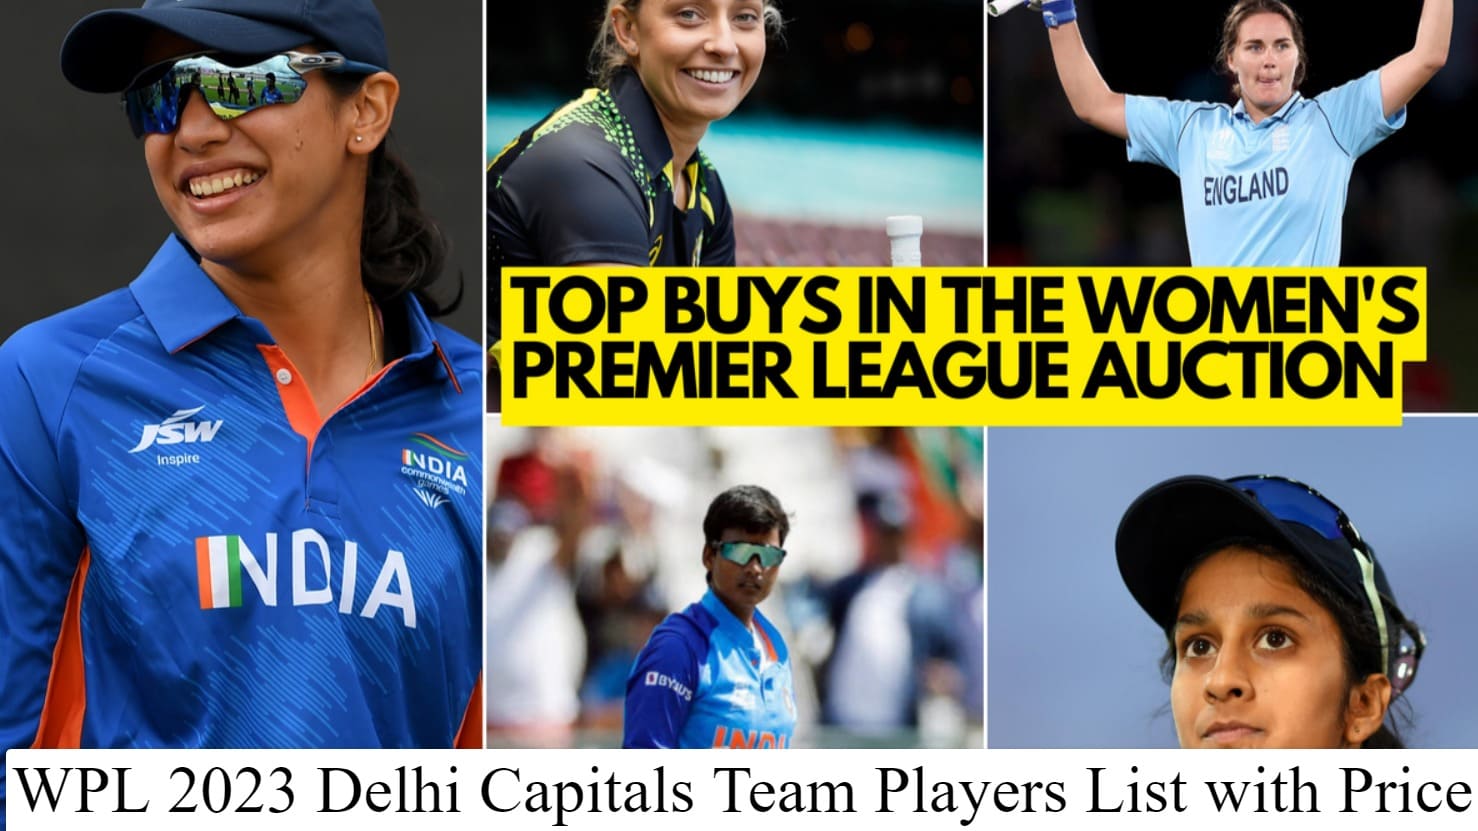 WPL 2023 Delhi Capitals Team Players List with Price